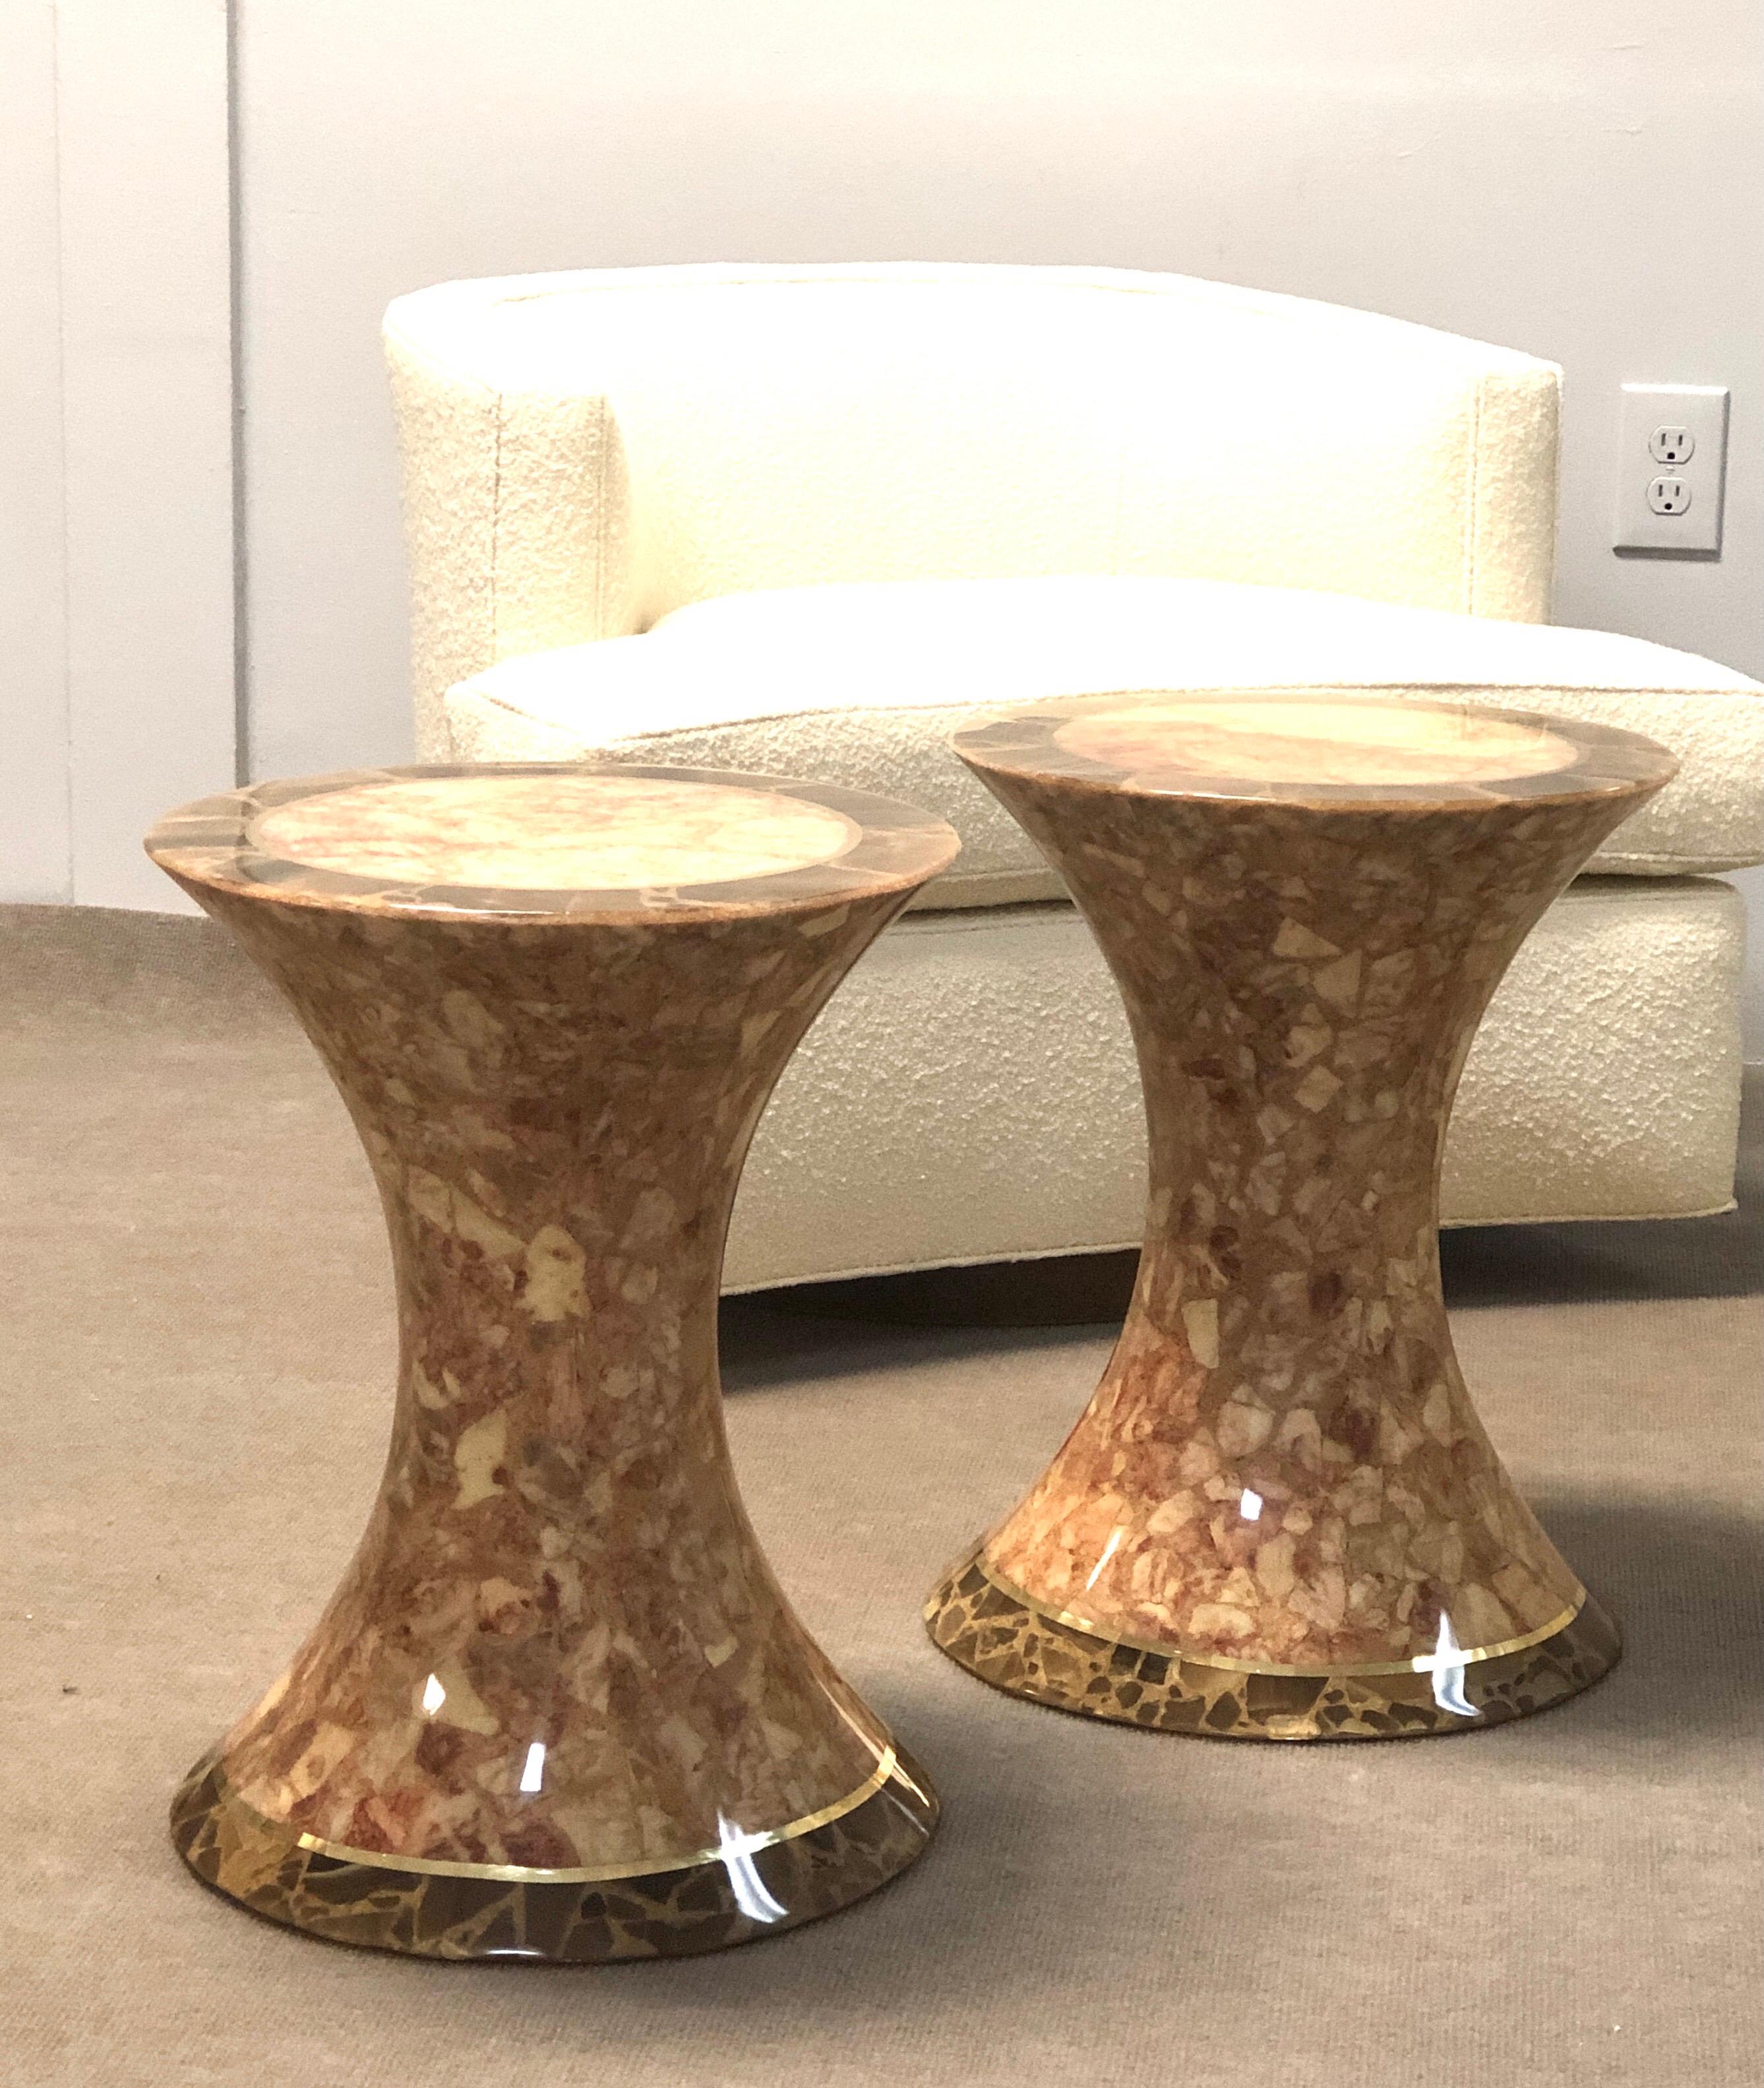 A pair of onyx tables. Modern hourglass form. Brass detail and a glossy finish.